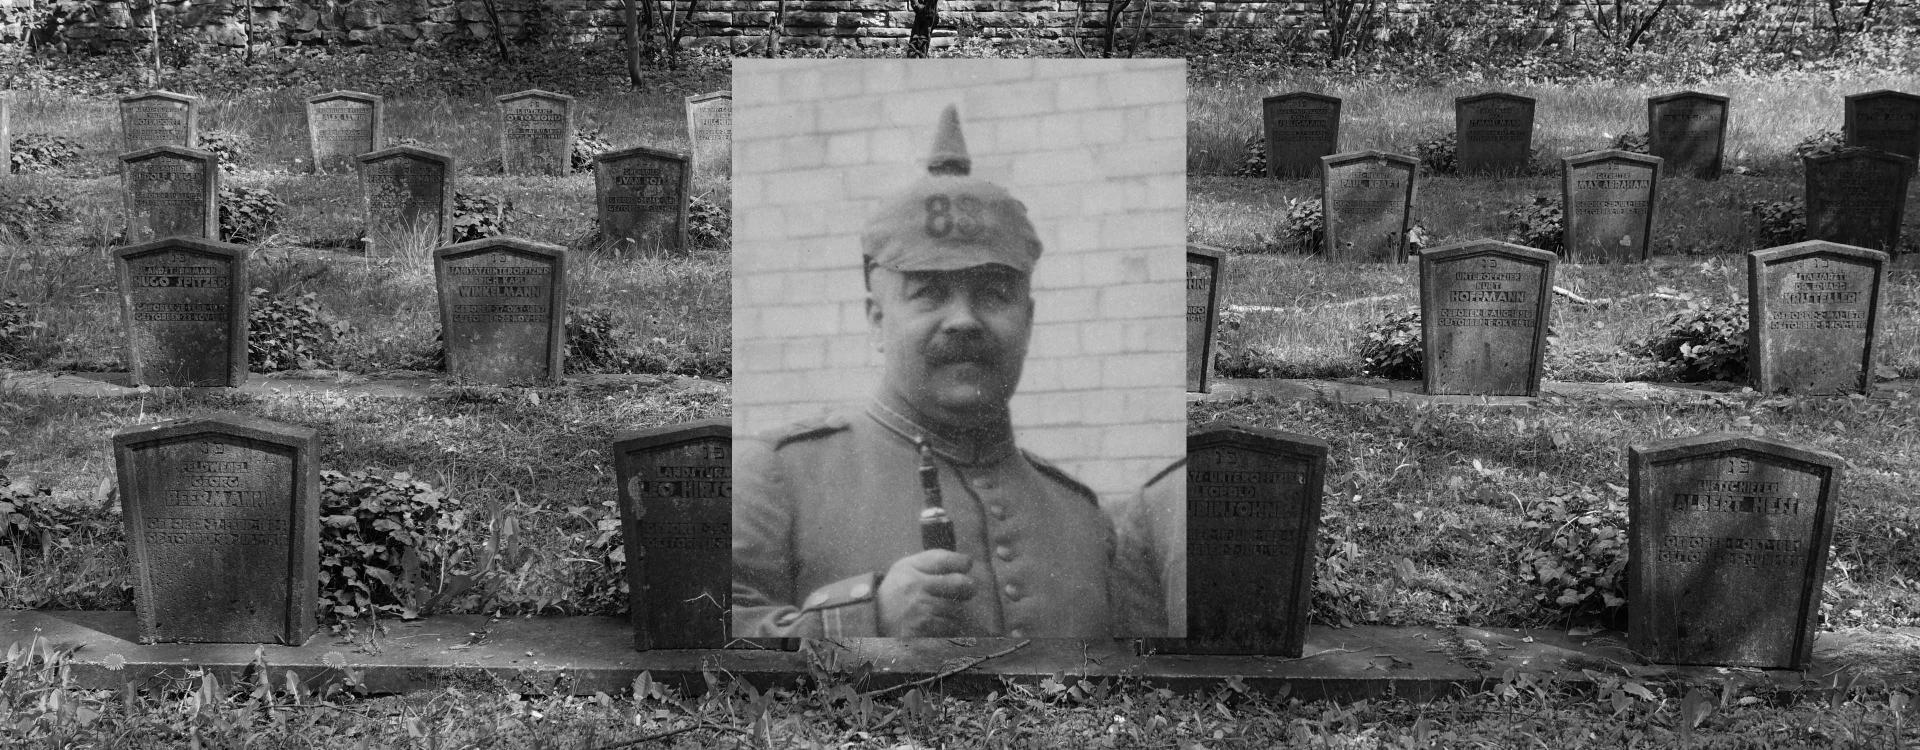 Black and white photo of a cemetery with a portrait photo of a soldier above it.